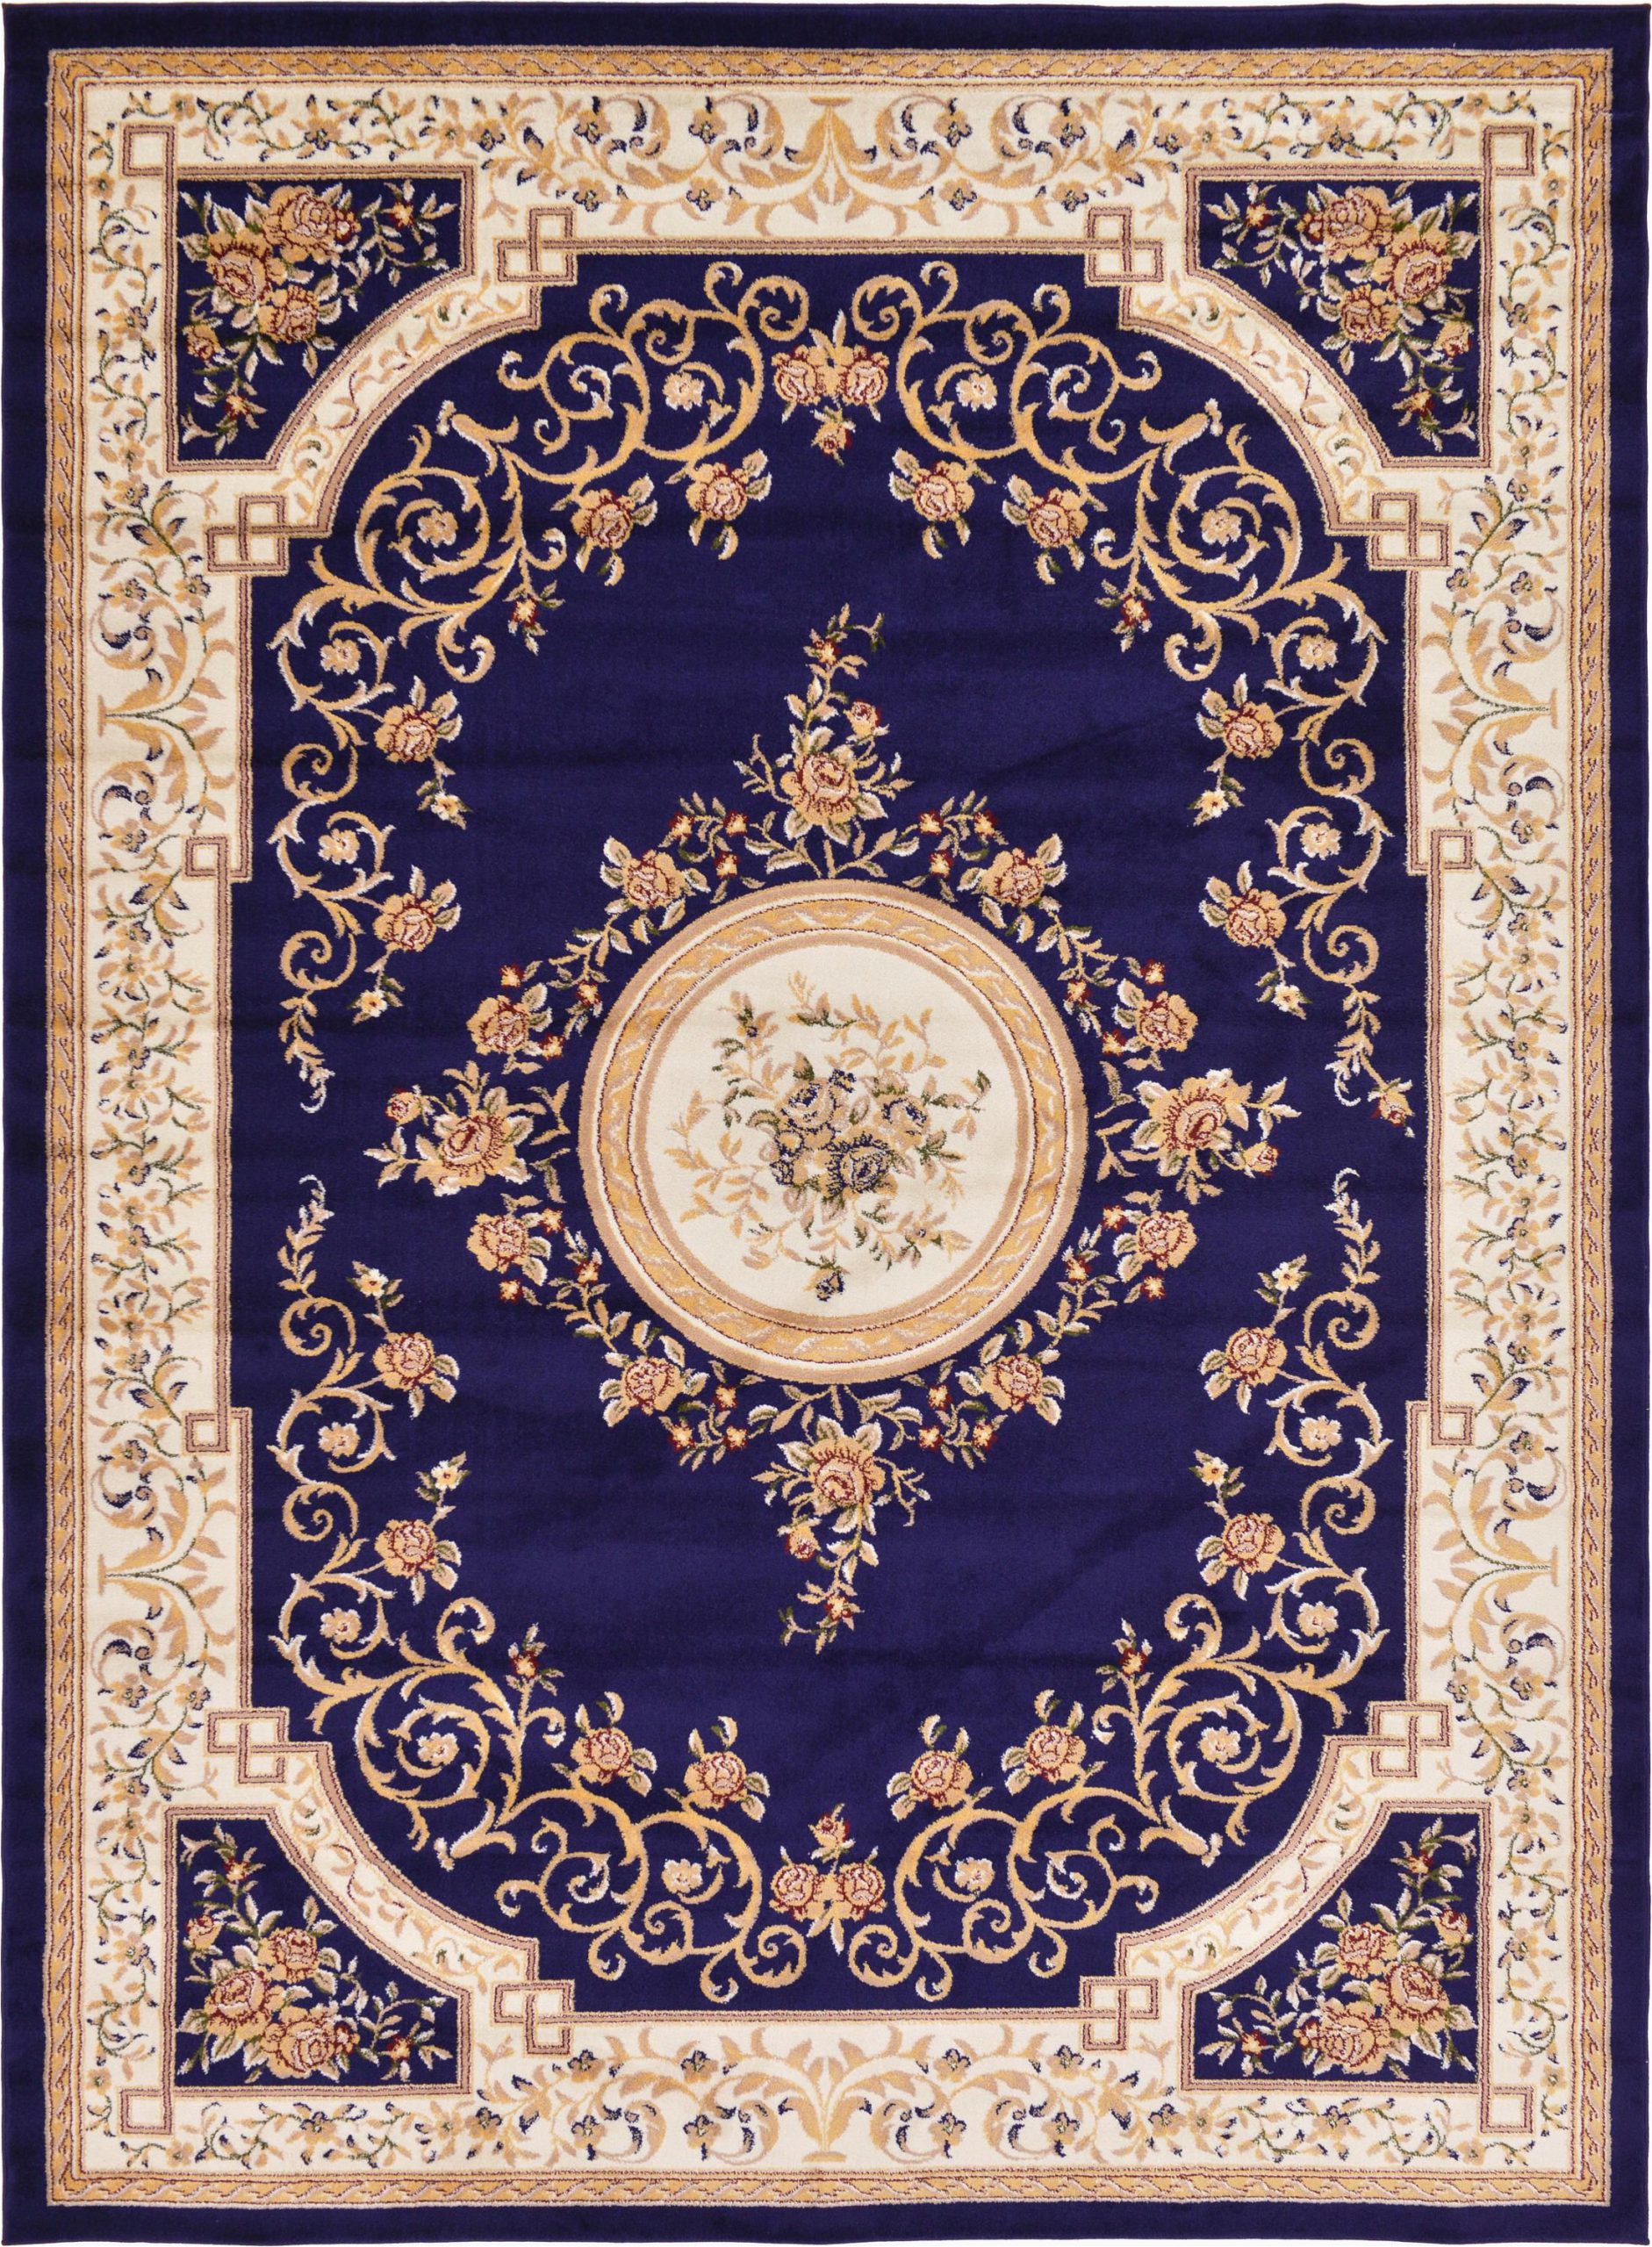 Navy Blue Patterned area Rug Navy Blue 9 X 12 Classic Aubusson Rug